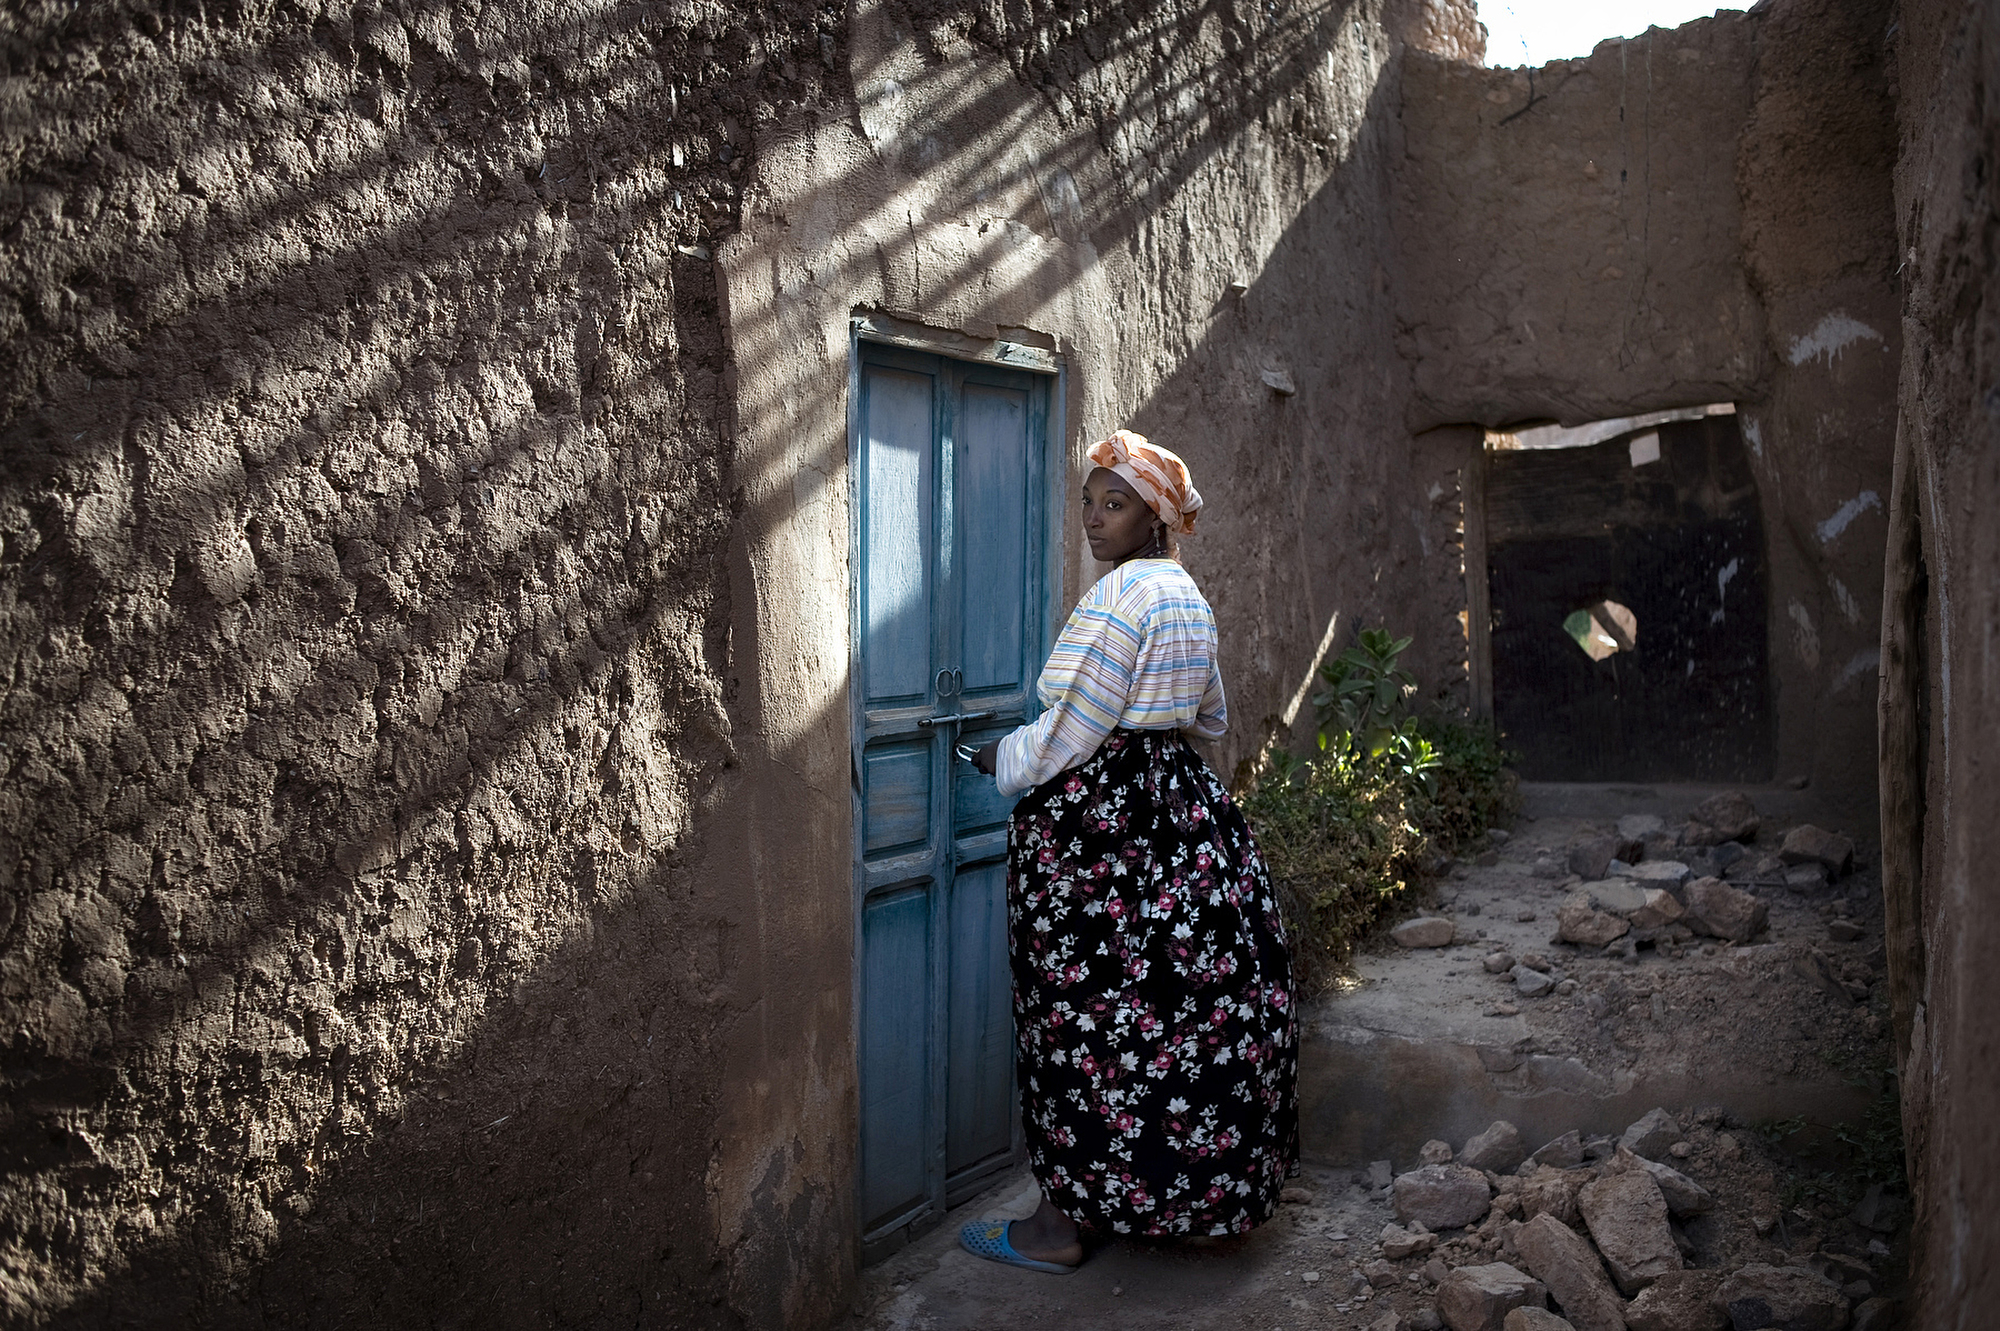 Zubeida, 28, opens the door to the Synagogue which she has been the guardian of since its restoration in 2002 in the small southern Village of Irill Noro, Morocco. (Photo: Aaron Vincent Elkaim)